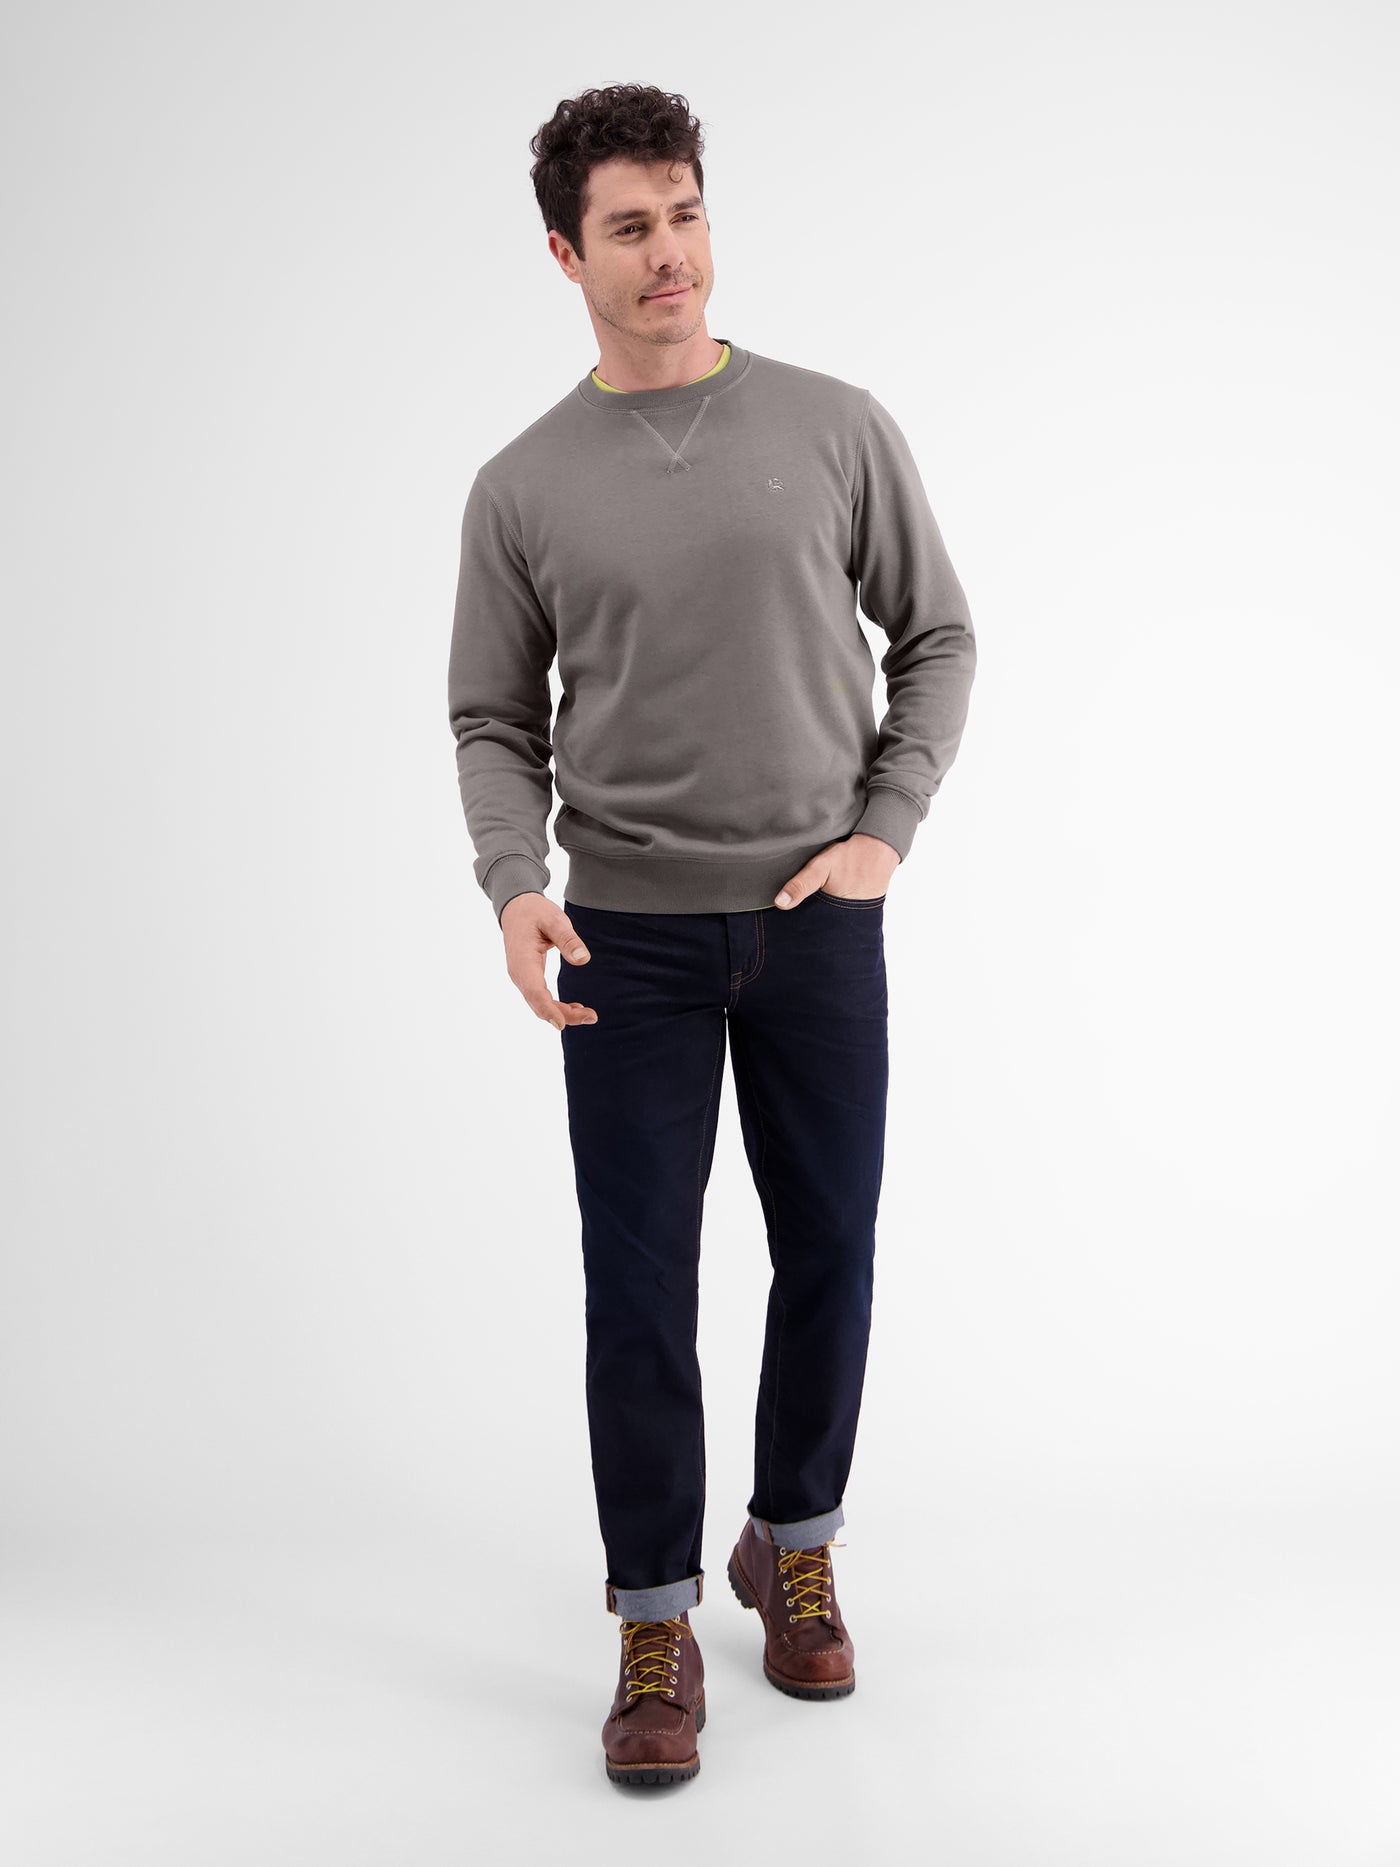 Lightweight sweater with a structured quality